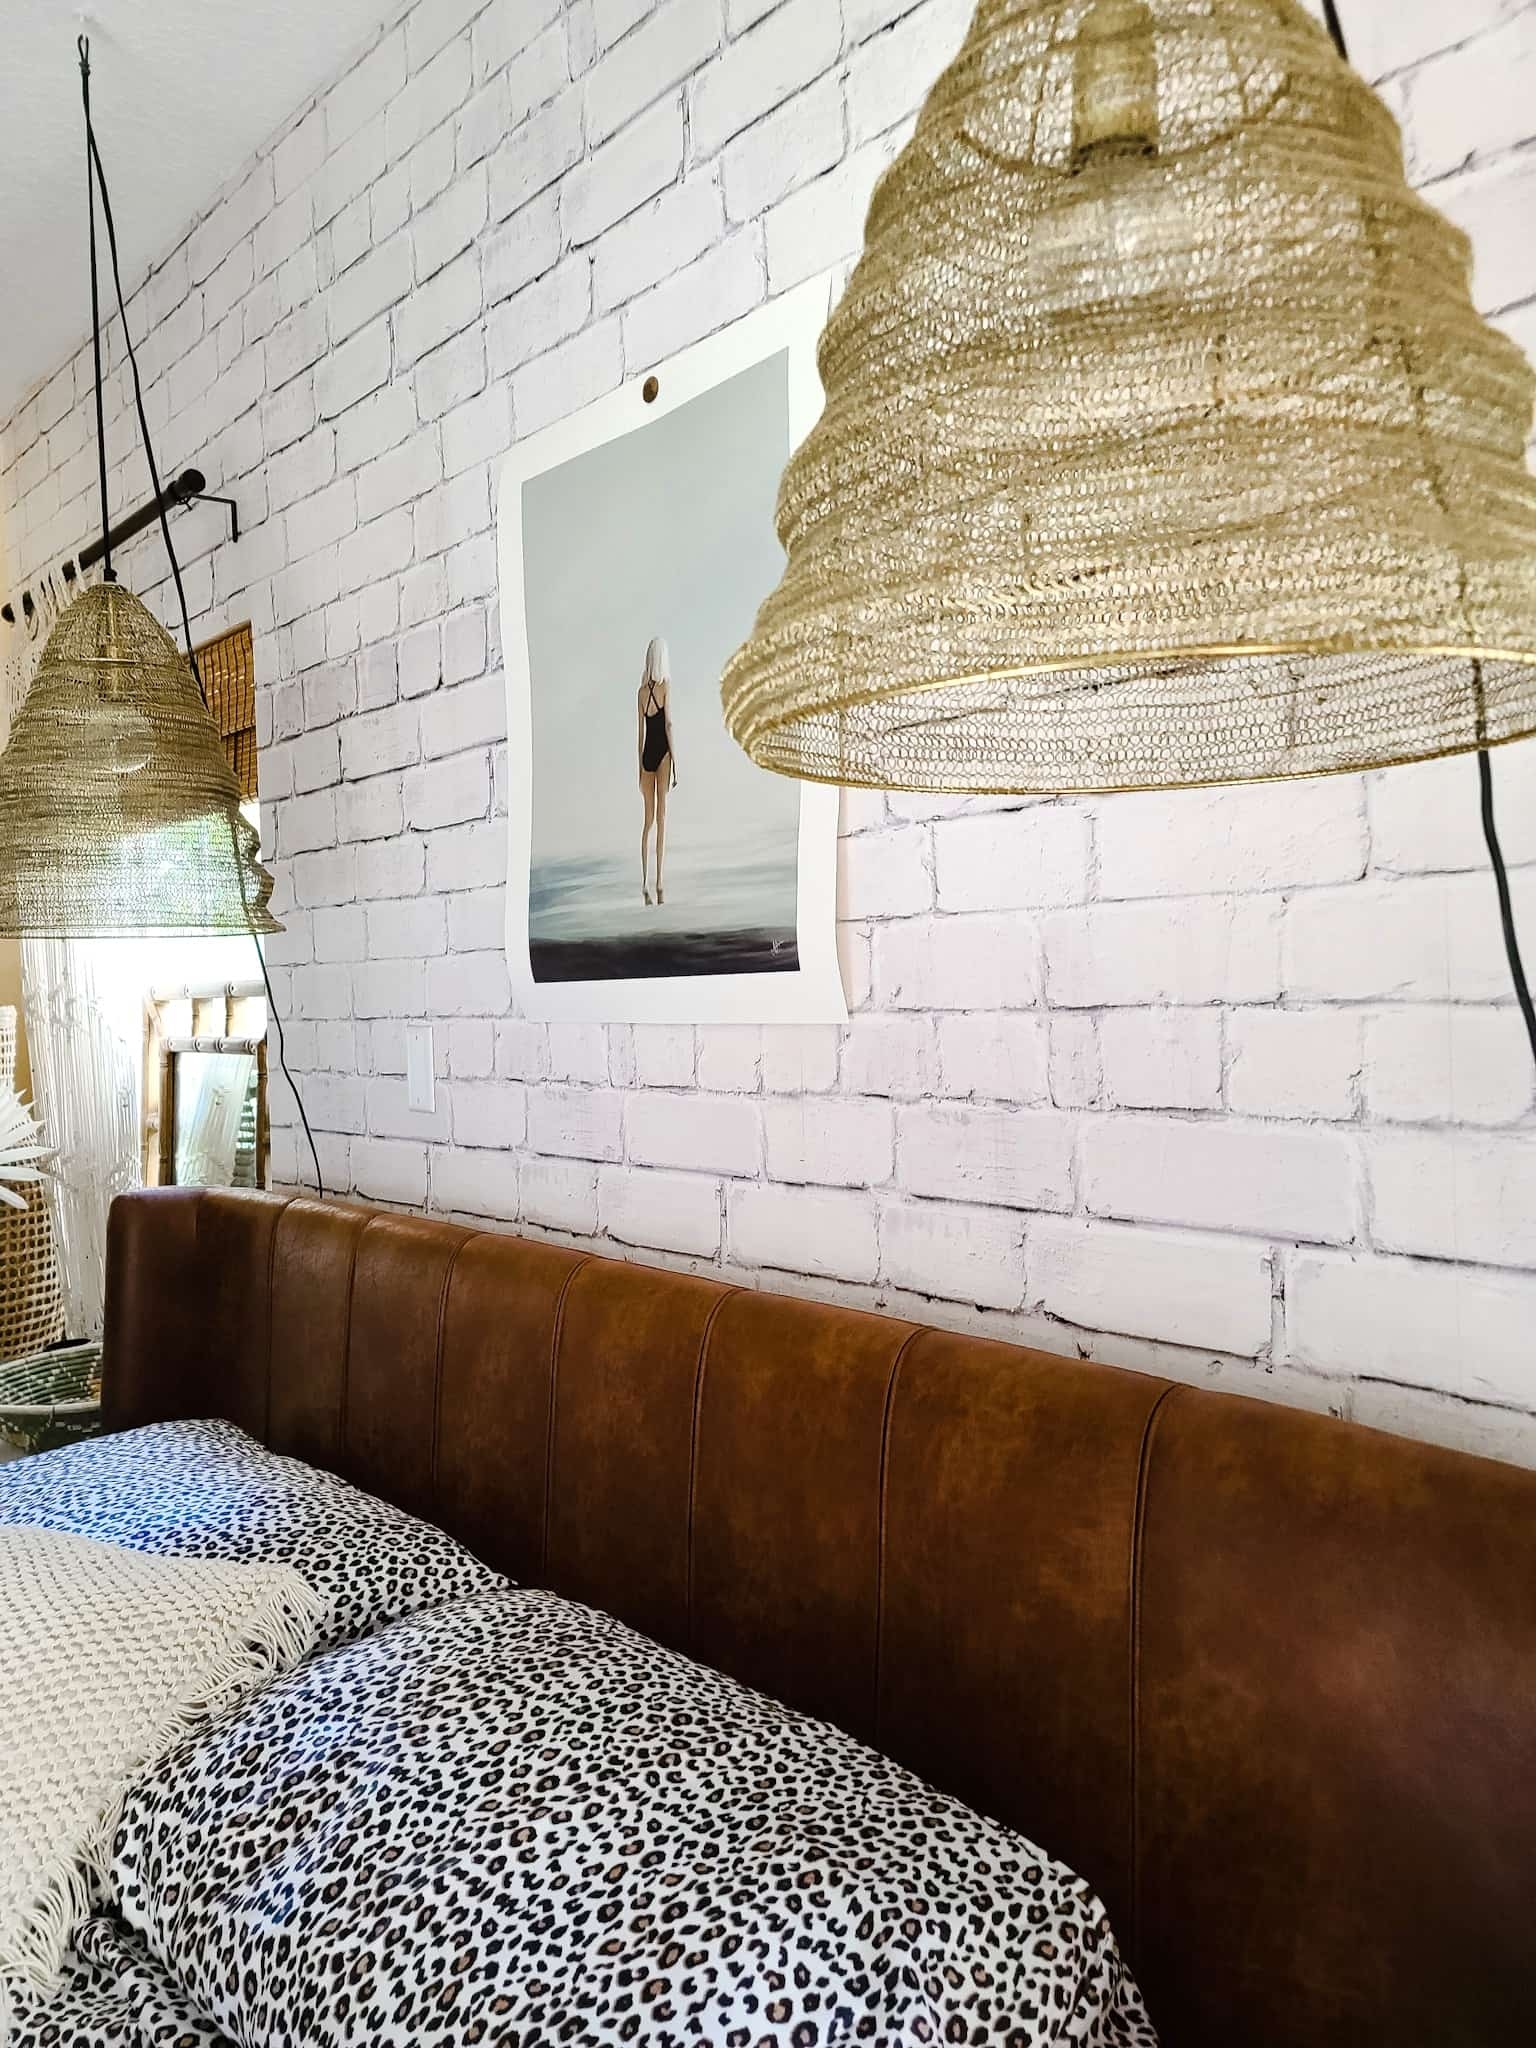 Joss & Main Master Bedroom Bed makeover refresh industrial modern farmhouse eclectic boho glam brick wall cozy fall decor decorating macrame leather headboard king size white neutral